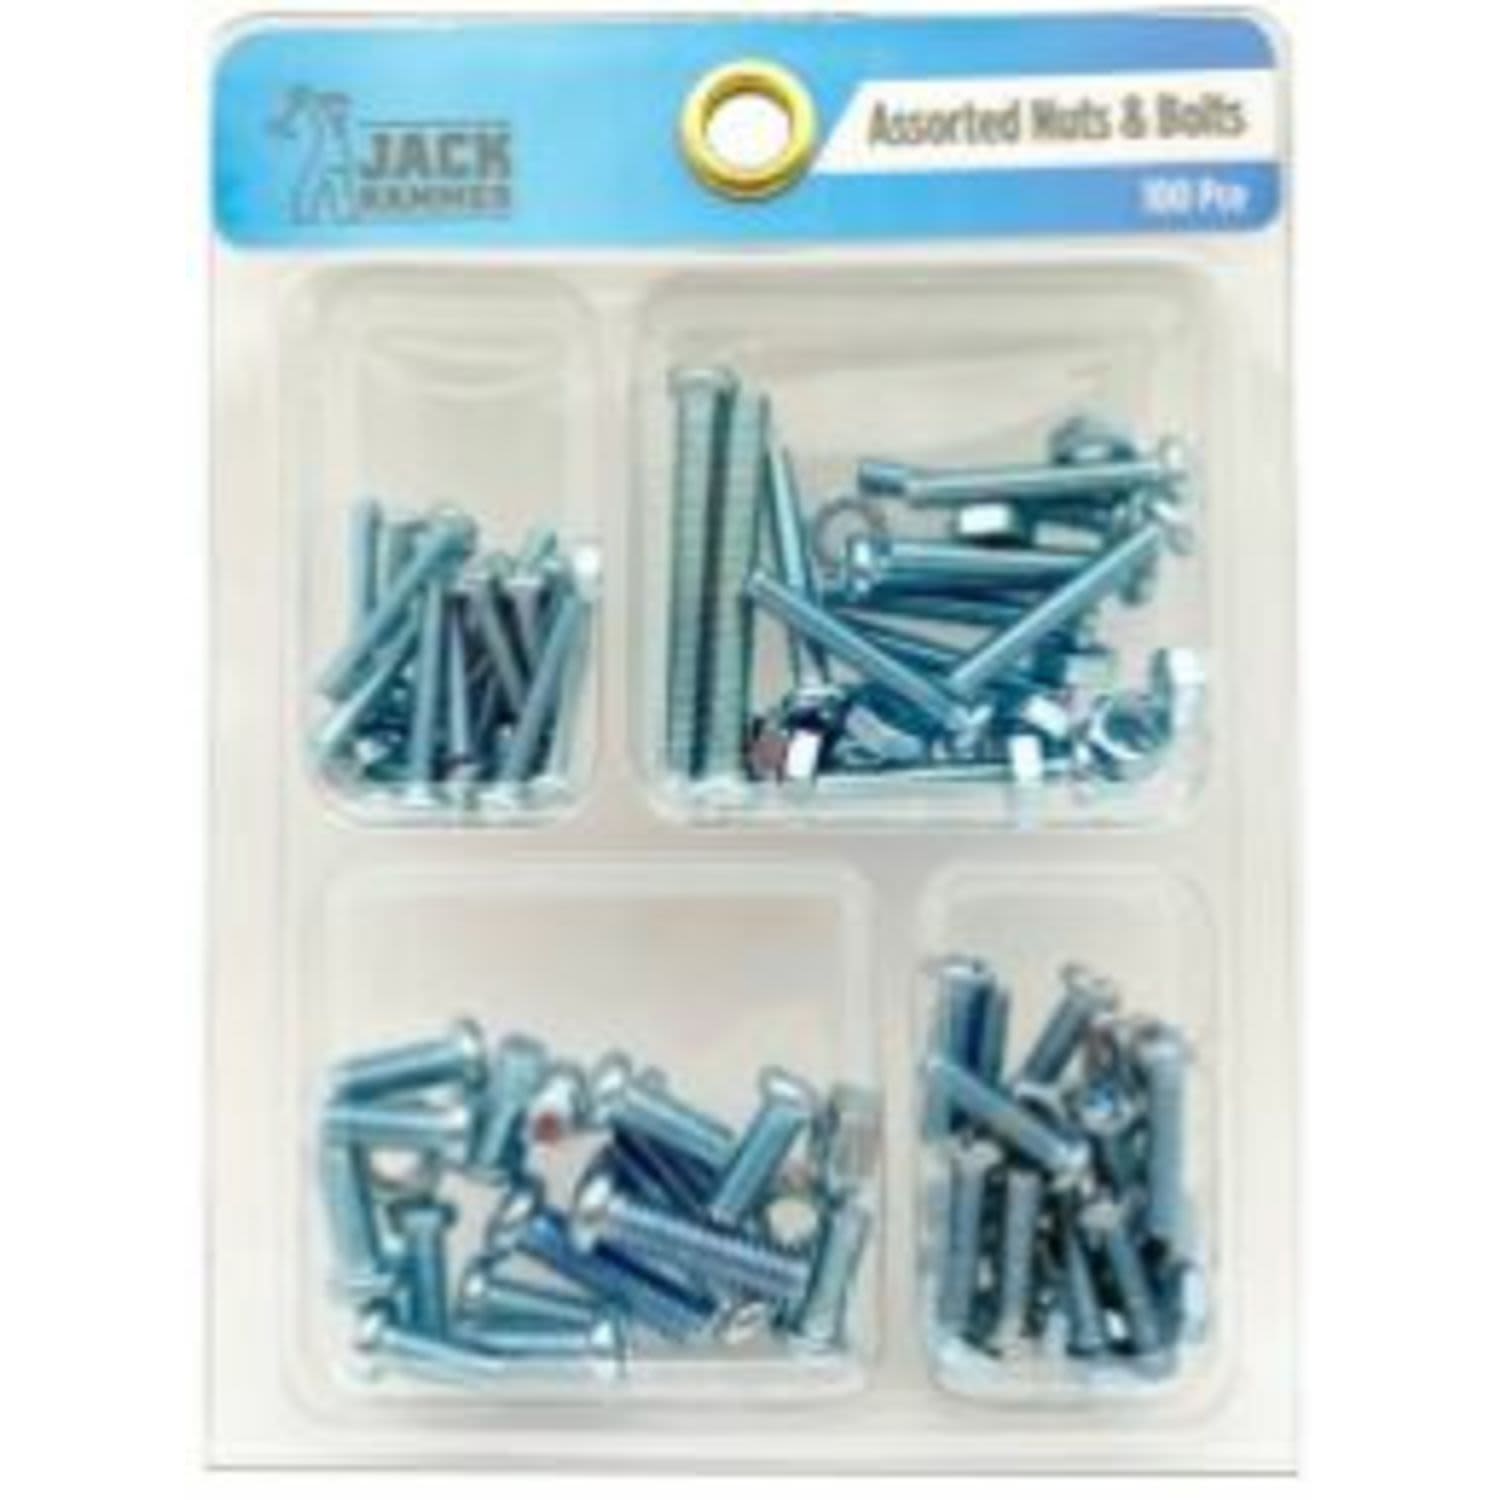 Jack Hammer Assorted Nuts & Bolts, 1 Each